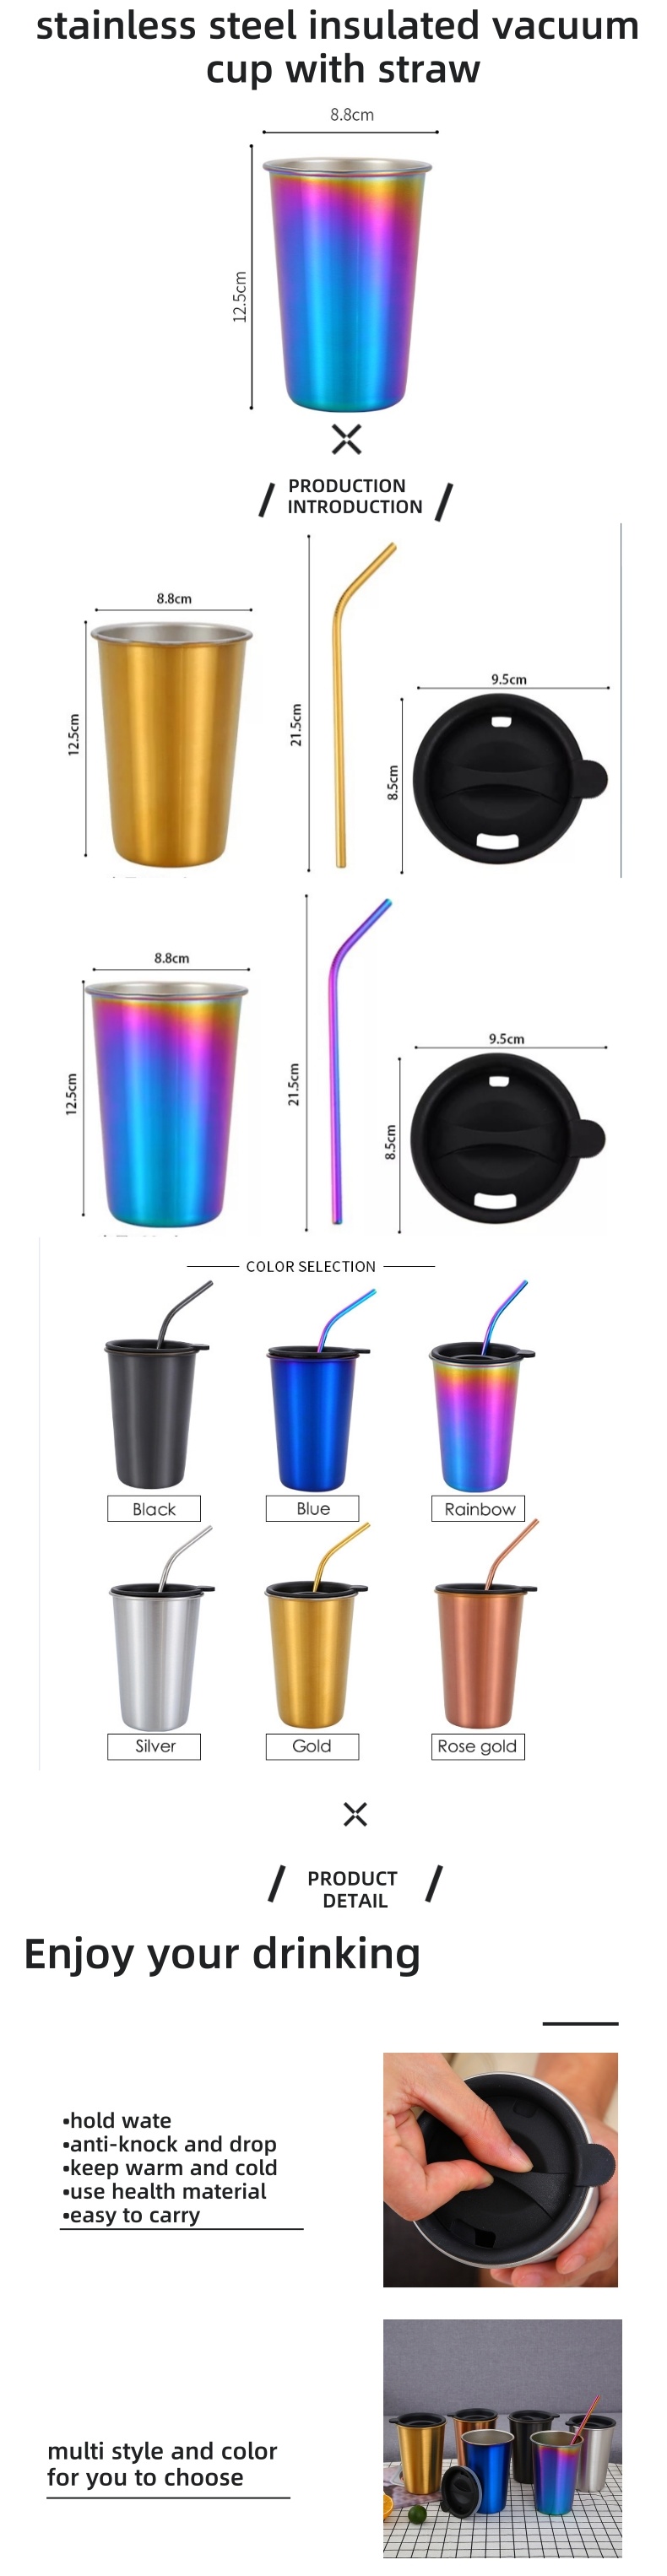 Stainless Steel Insulated Vacuum Cup with Straw